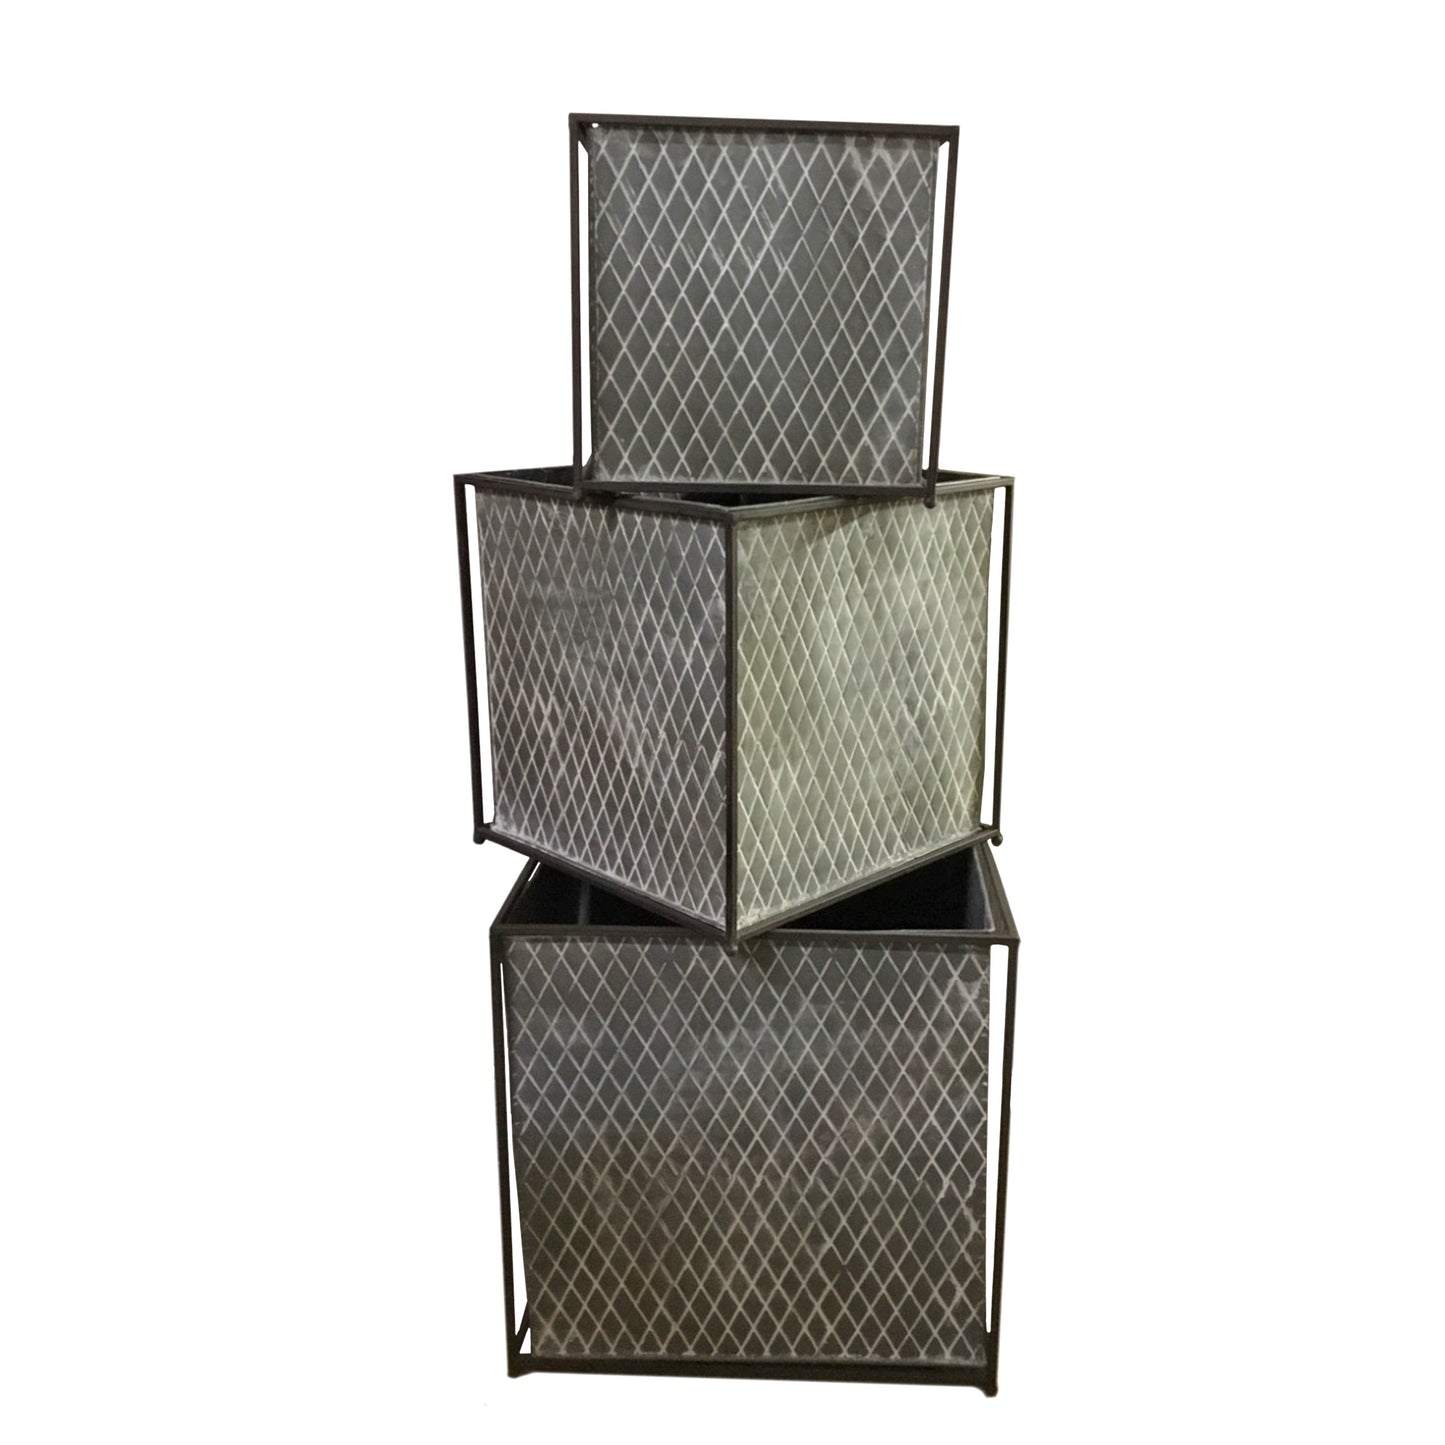 Square Quilted Galvanized Metal Planter, 3 sizes